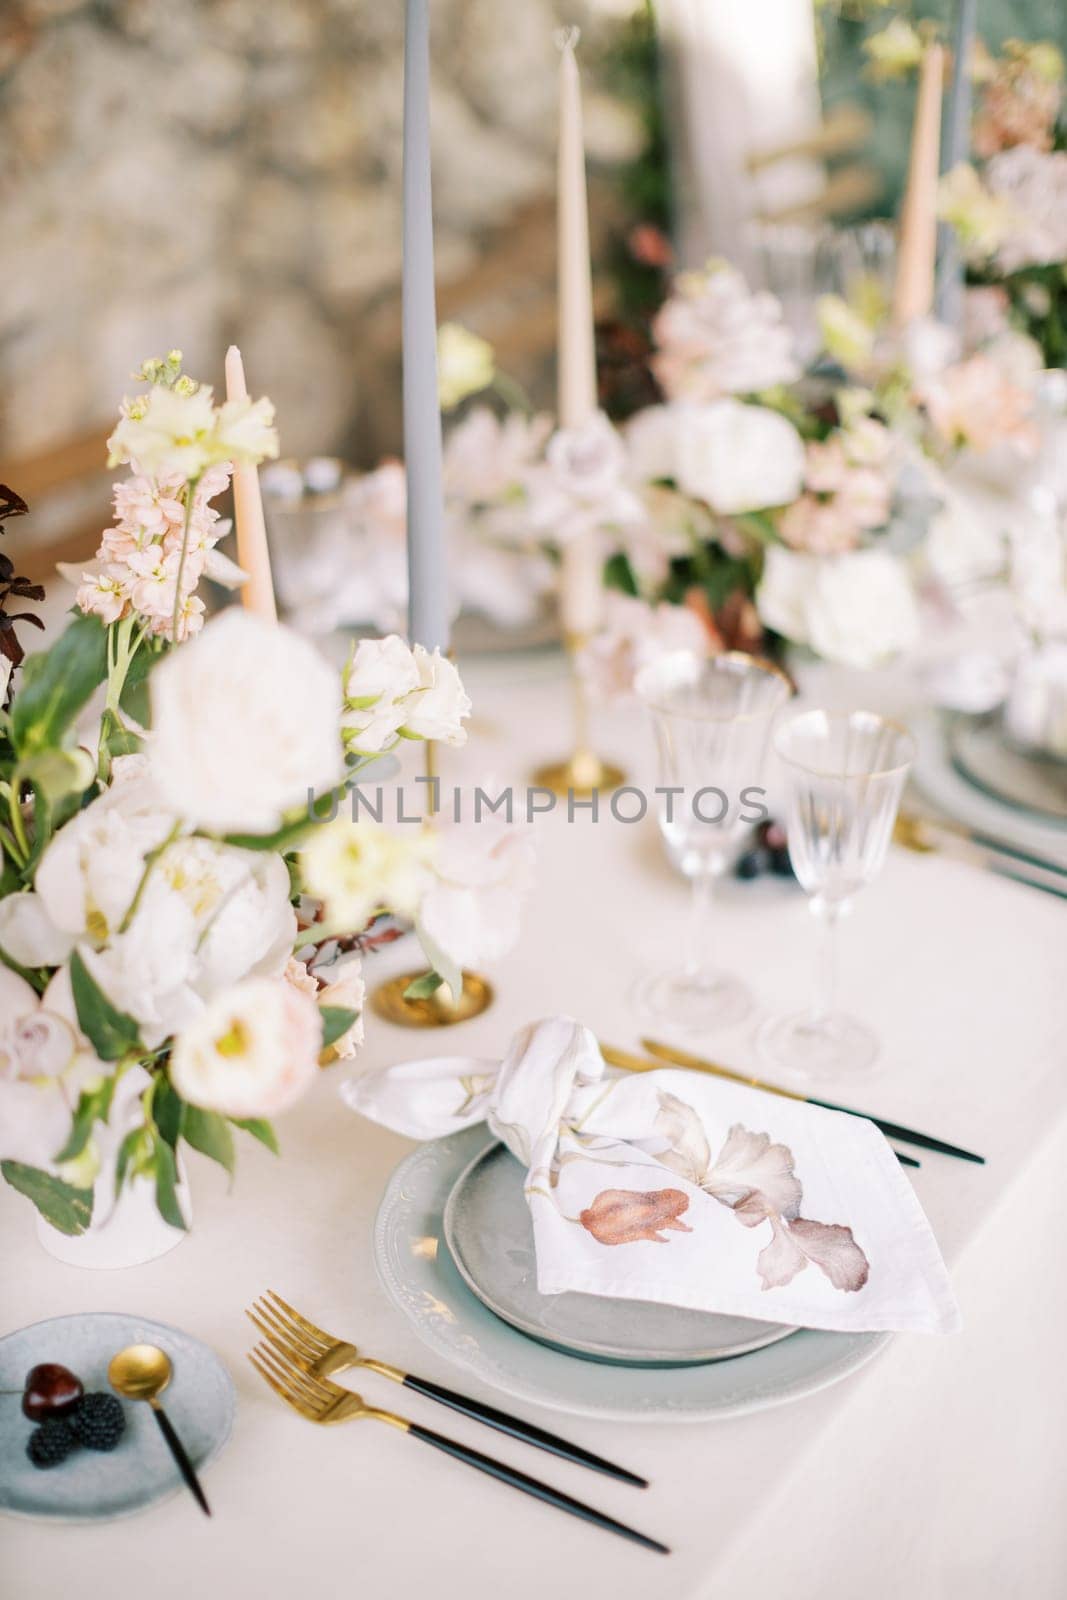 Knotted colorful napkin lies on a plate on the table next to a bouquet of flowers and cutlery by Nadtochiy